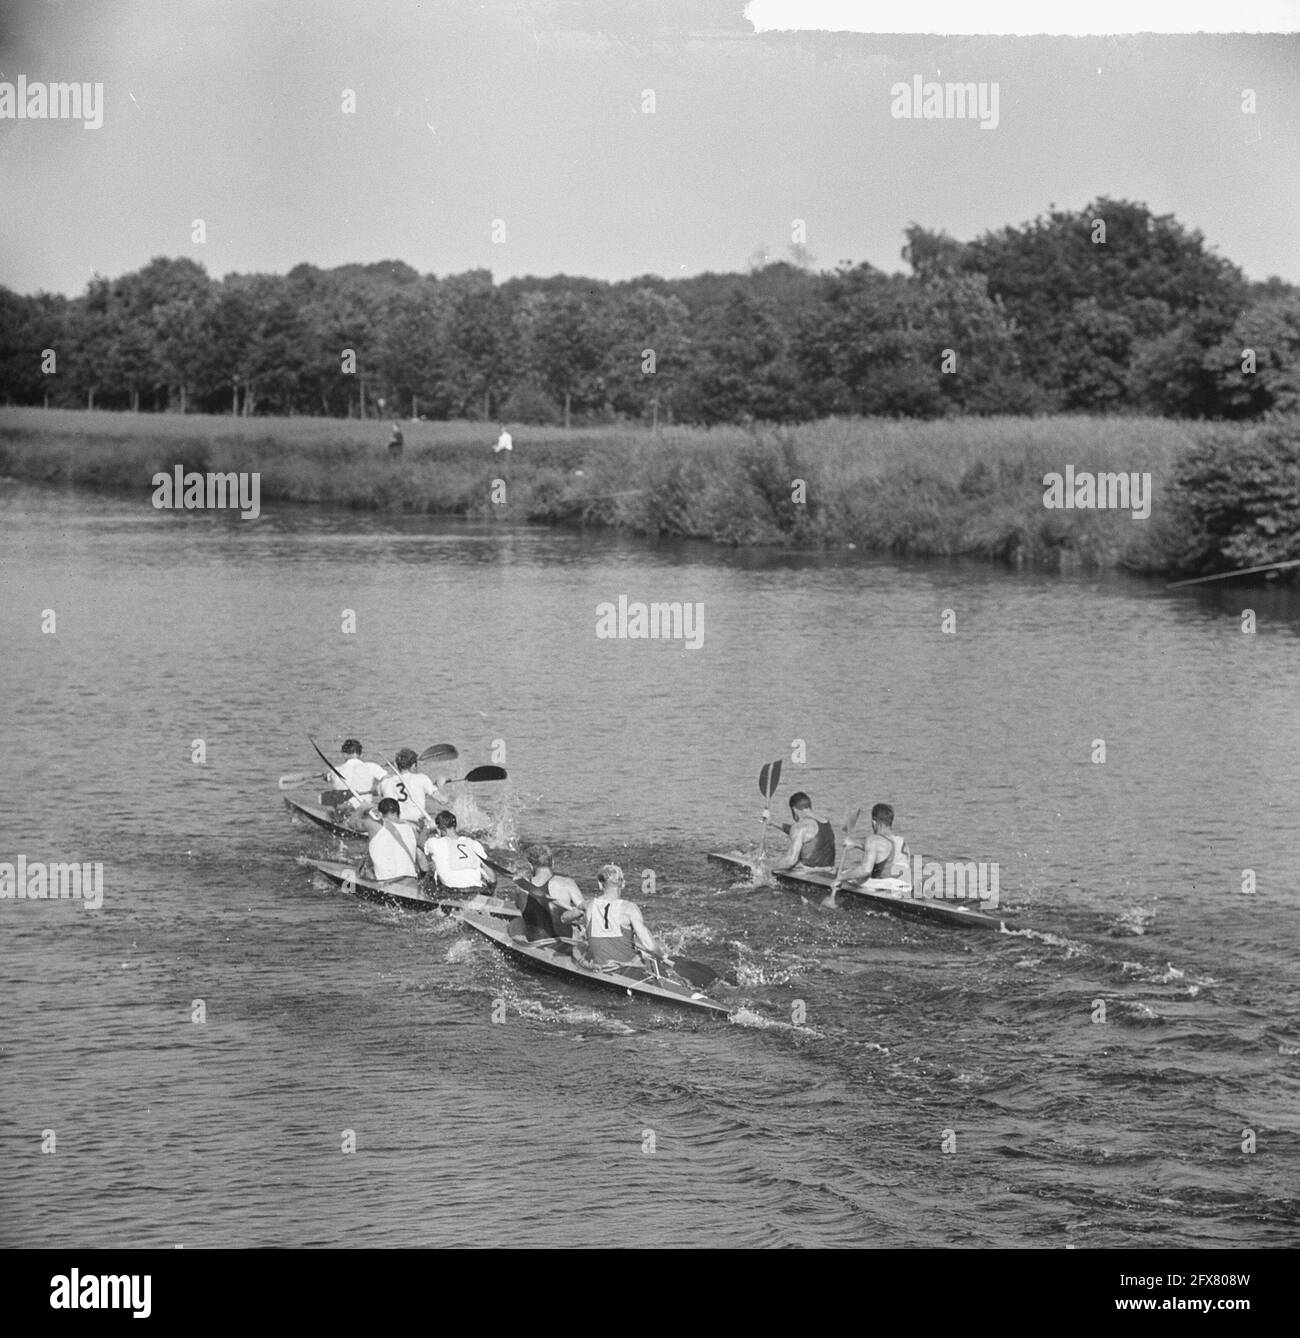 Championship of the Netherlands Canoe 10,000m Men on Twenthe Canal at Eefde. Lagrand, Kracht, Baan, van der Ster, Weyzen, Knuppe, Leeuwerik and Beunder, June 29, 1963, Championships, canoeists, The Netherlands, 20th century press agency photo, news to remember, documentary, historic photography 1945-1990, visual stories, human history of the Twentieth Century, capturing moments in time Stock Photo